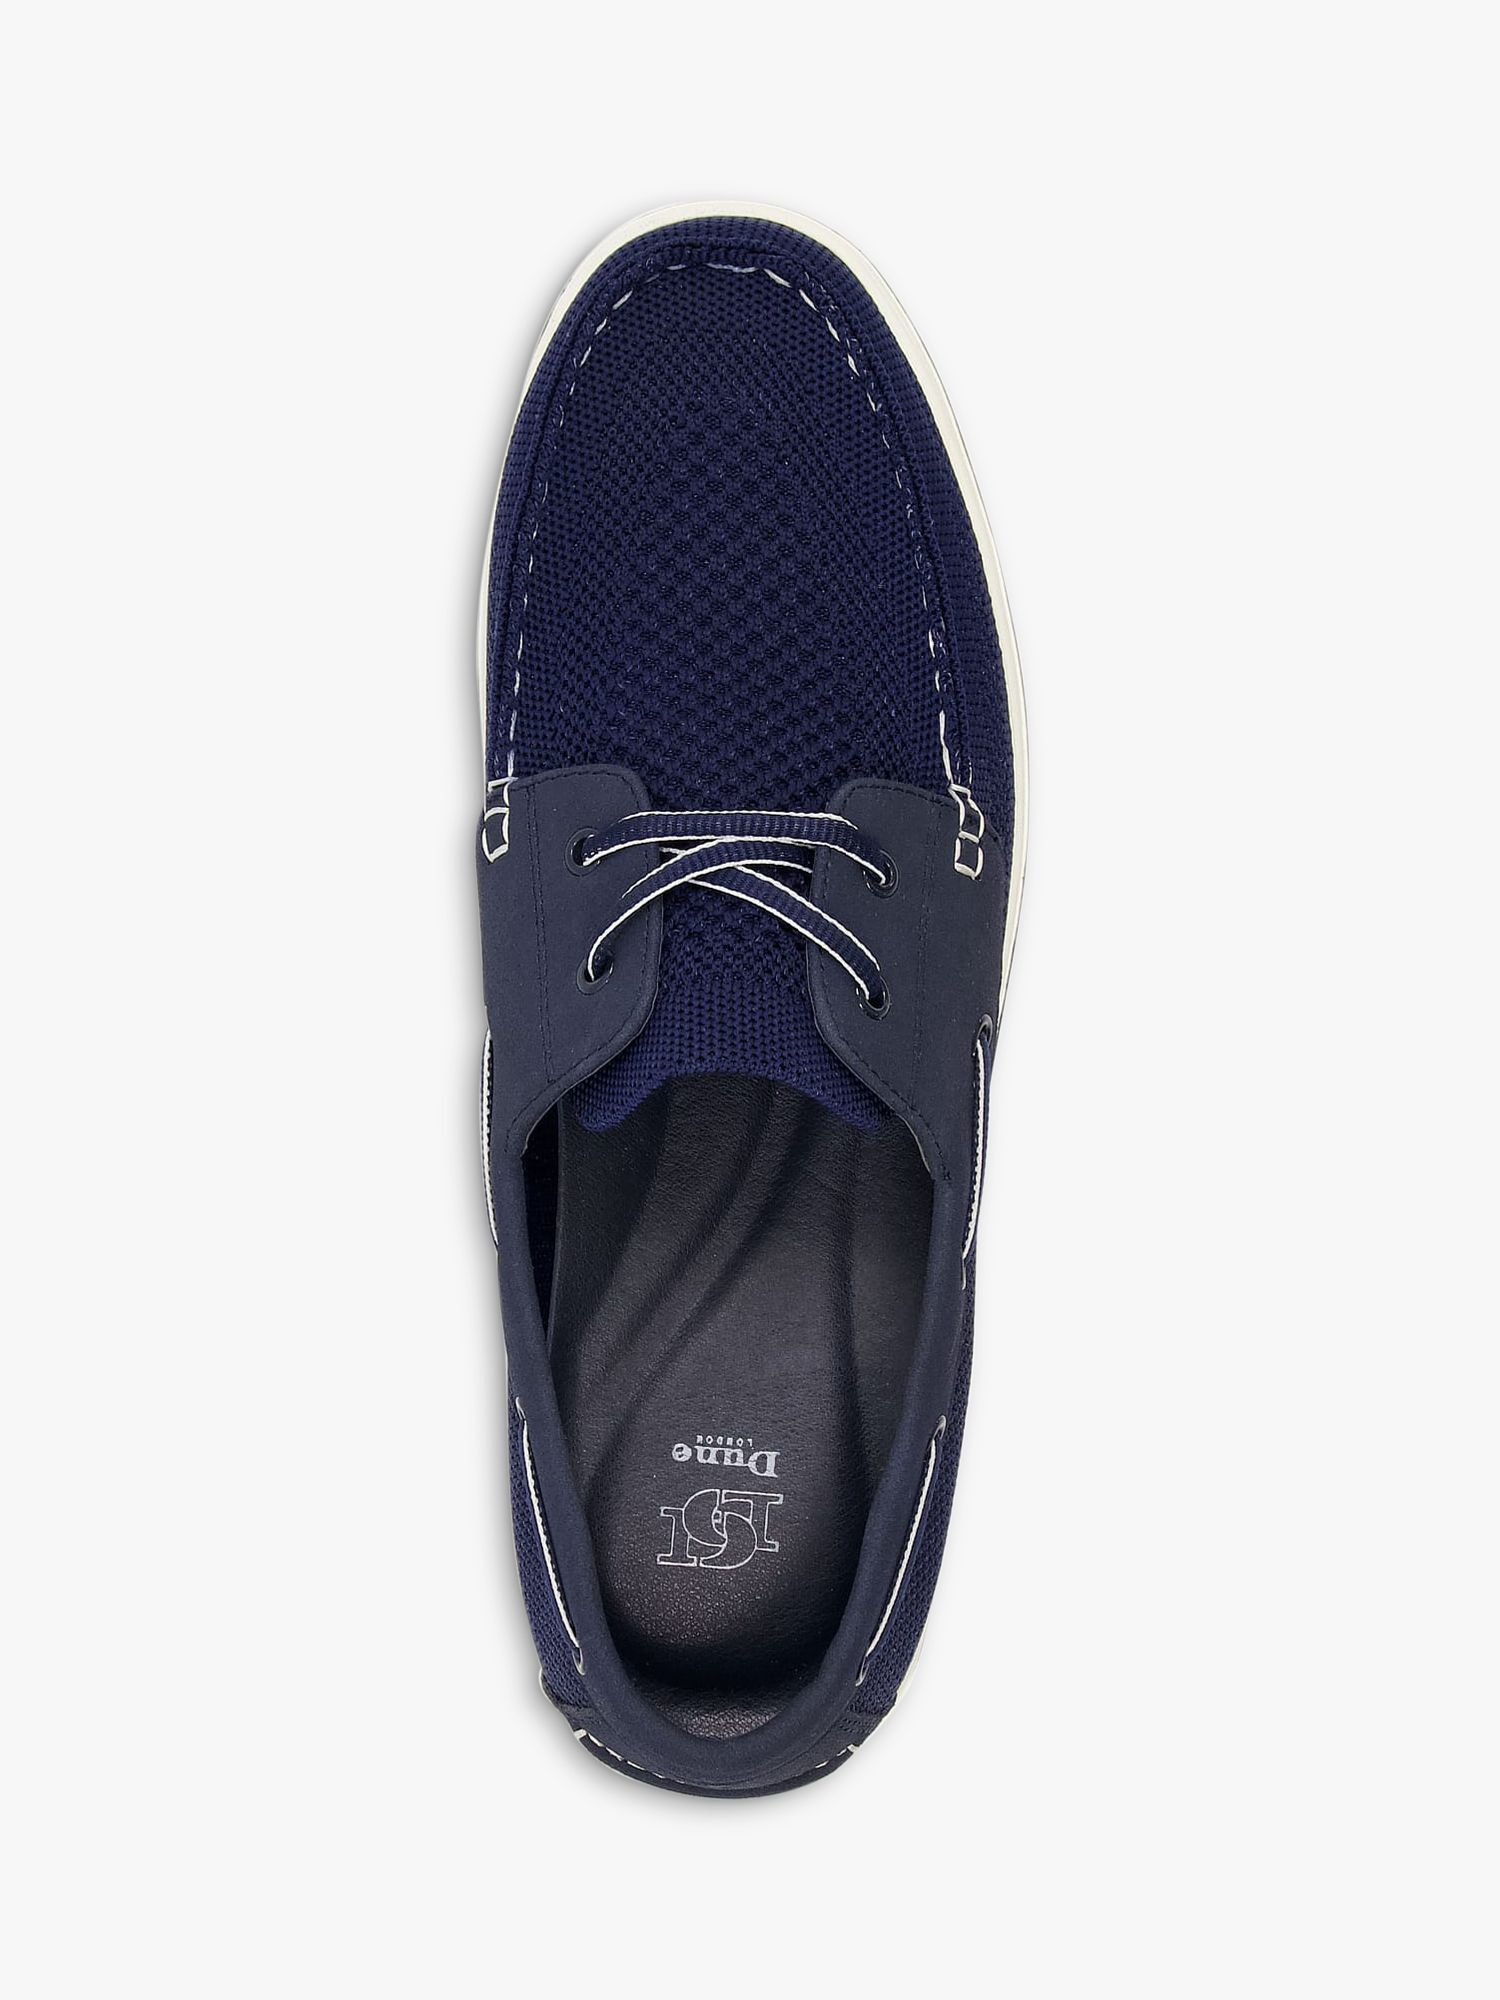 Dune Burnner Knitted Boat Shoes, Navy-fabric at John Lewis & Partners